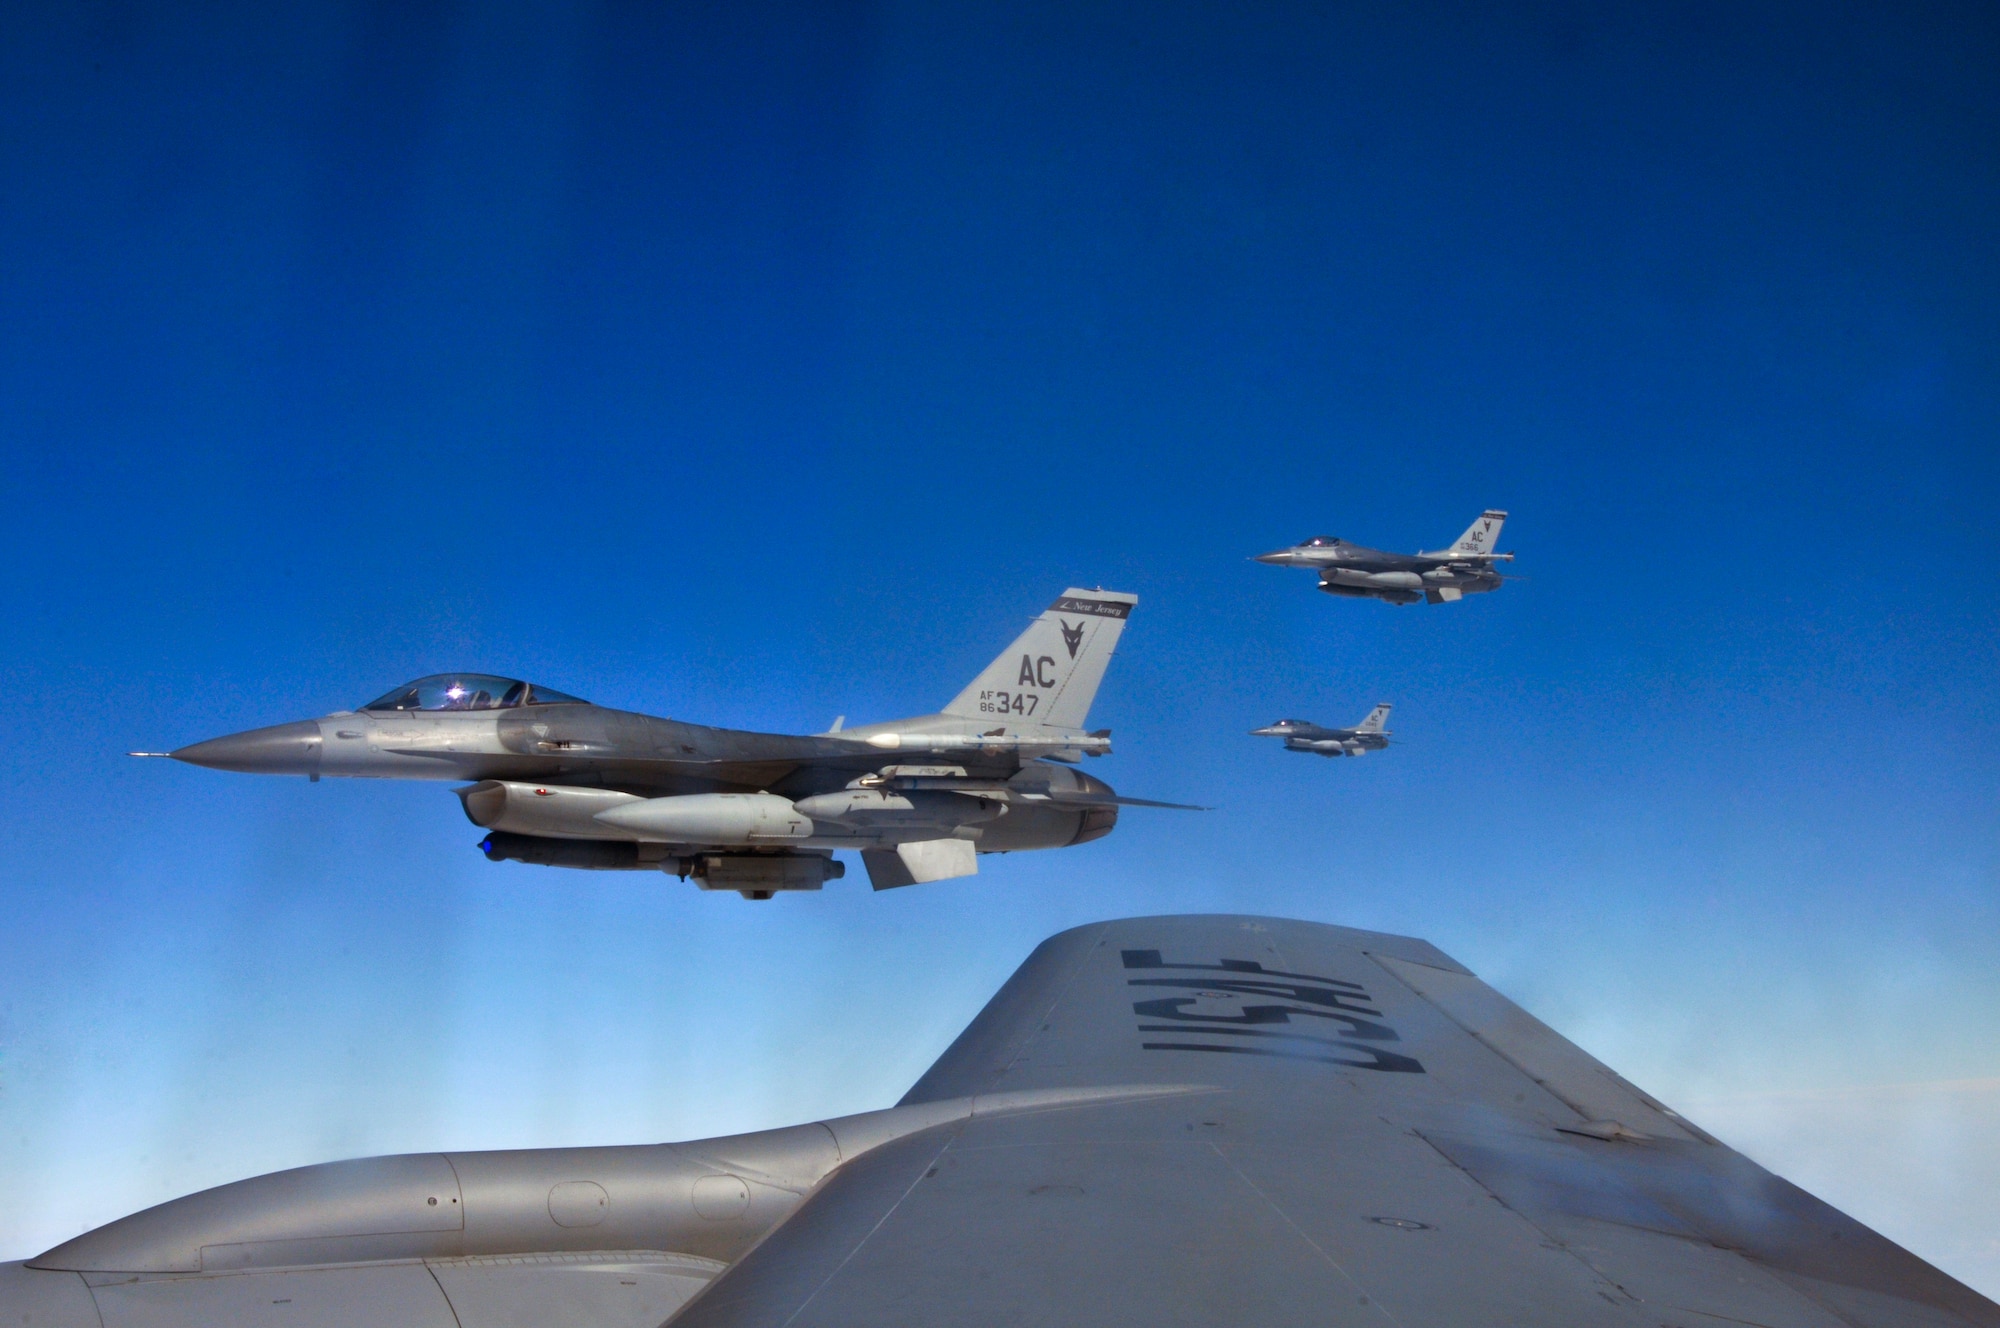 A picture of three U.S Air Force F-16 Fighting Falcons flying near a 191st Air Refueling Squadron KC-135 Stratotanker.